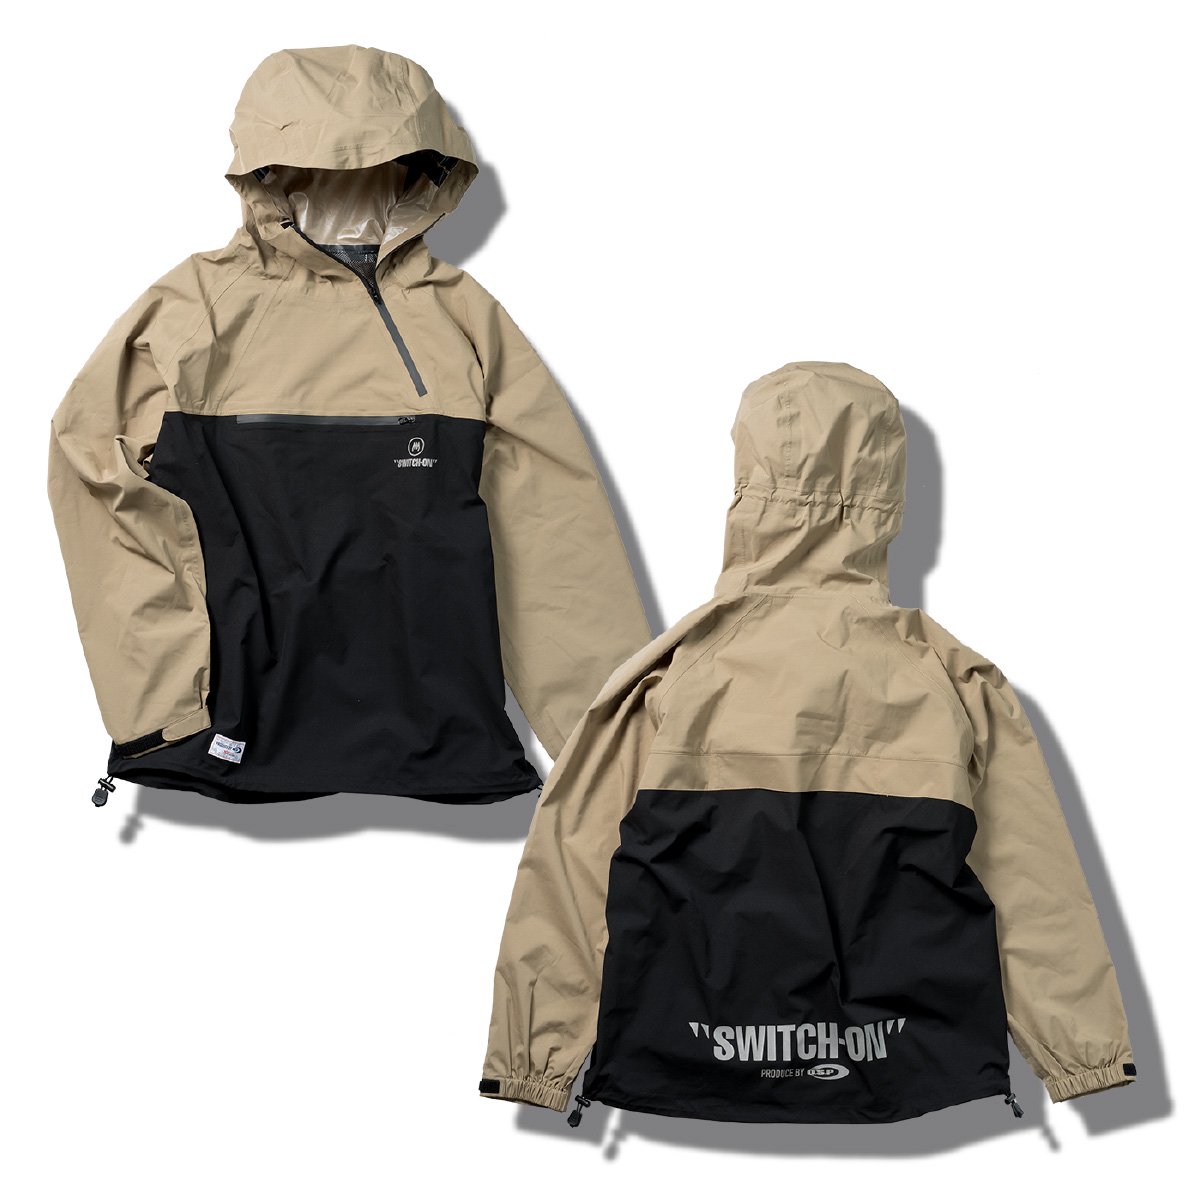 3A Anorak hoodie<img class='new_mark_img2' src='https://img.shop-pro.jp/img/new/icons62.gif' style='border:none;display:inline;margin:0px;padding:0px;width:auto;' />